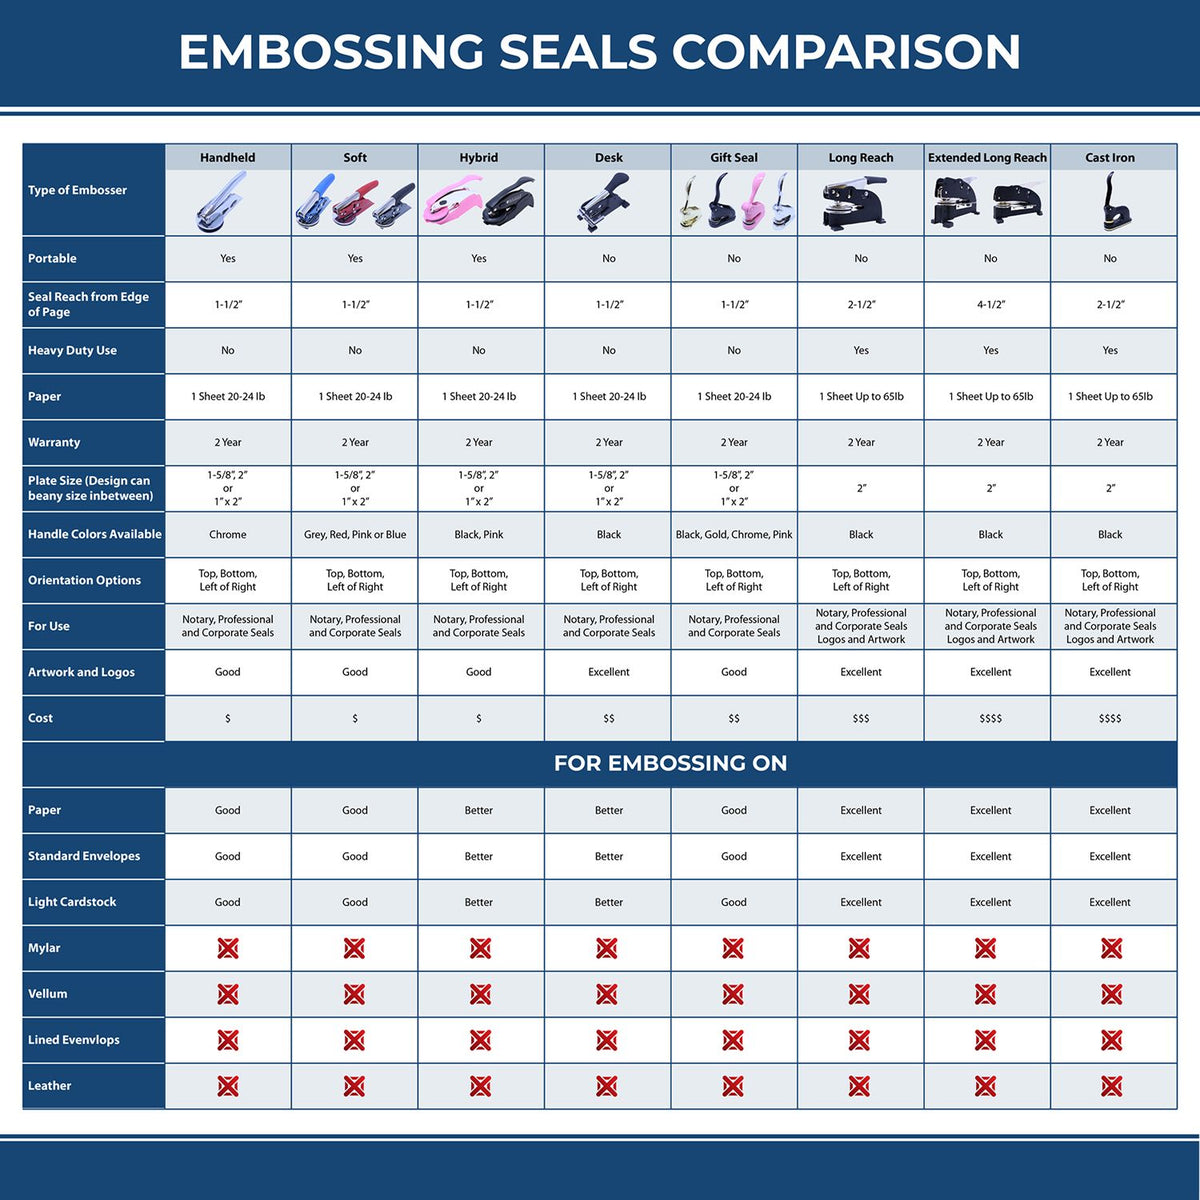 A comparison chart for the different types of mount models available for the Gift Washington Engineer Seal